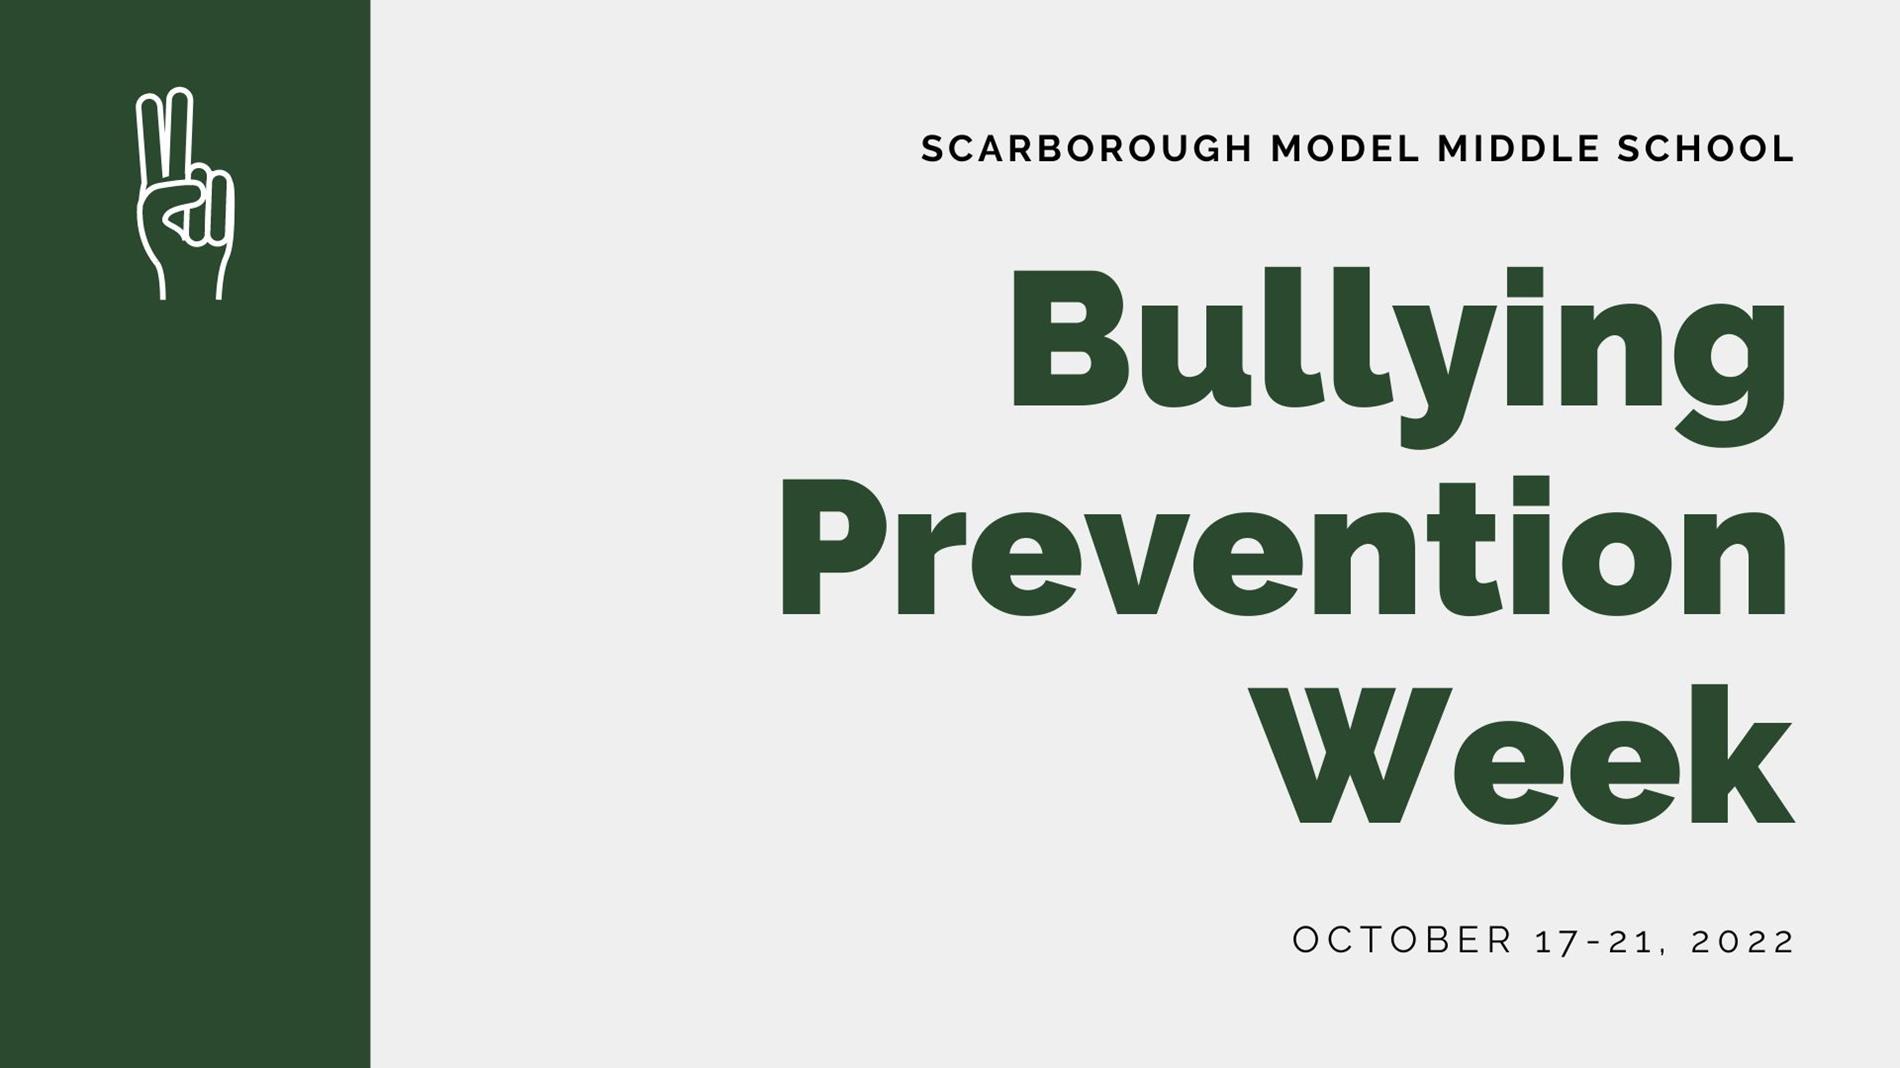 This is our presentation for Anti-Bullying Week.